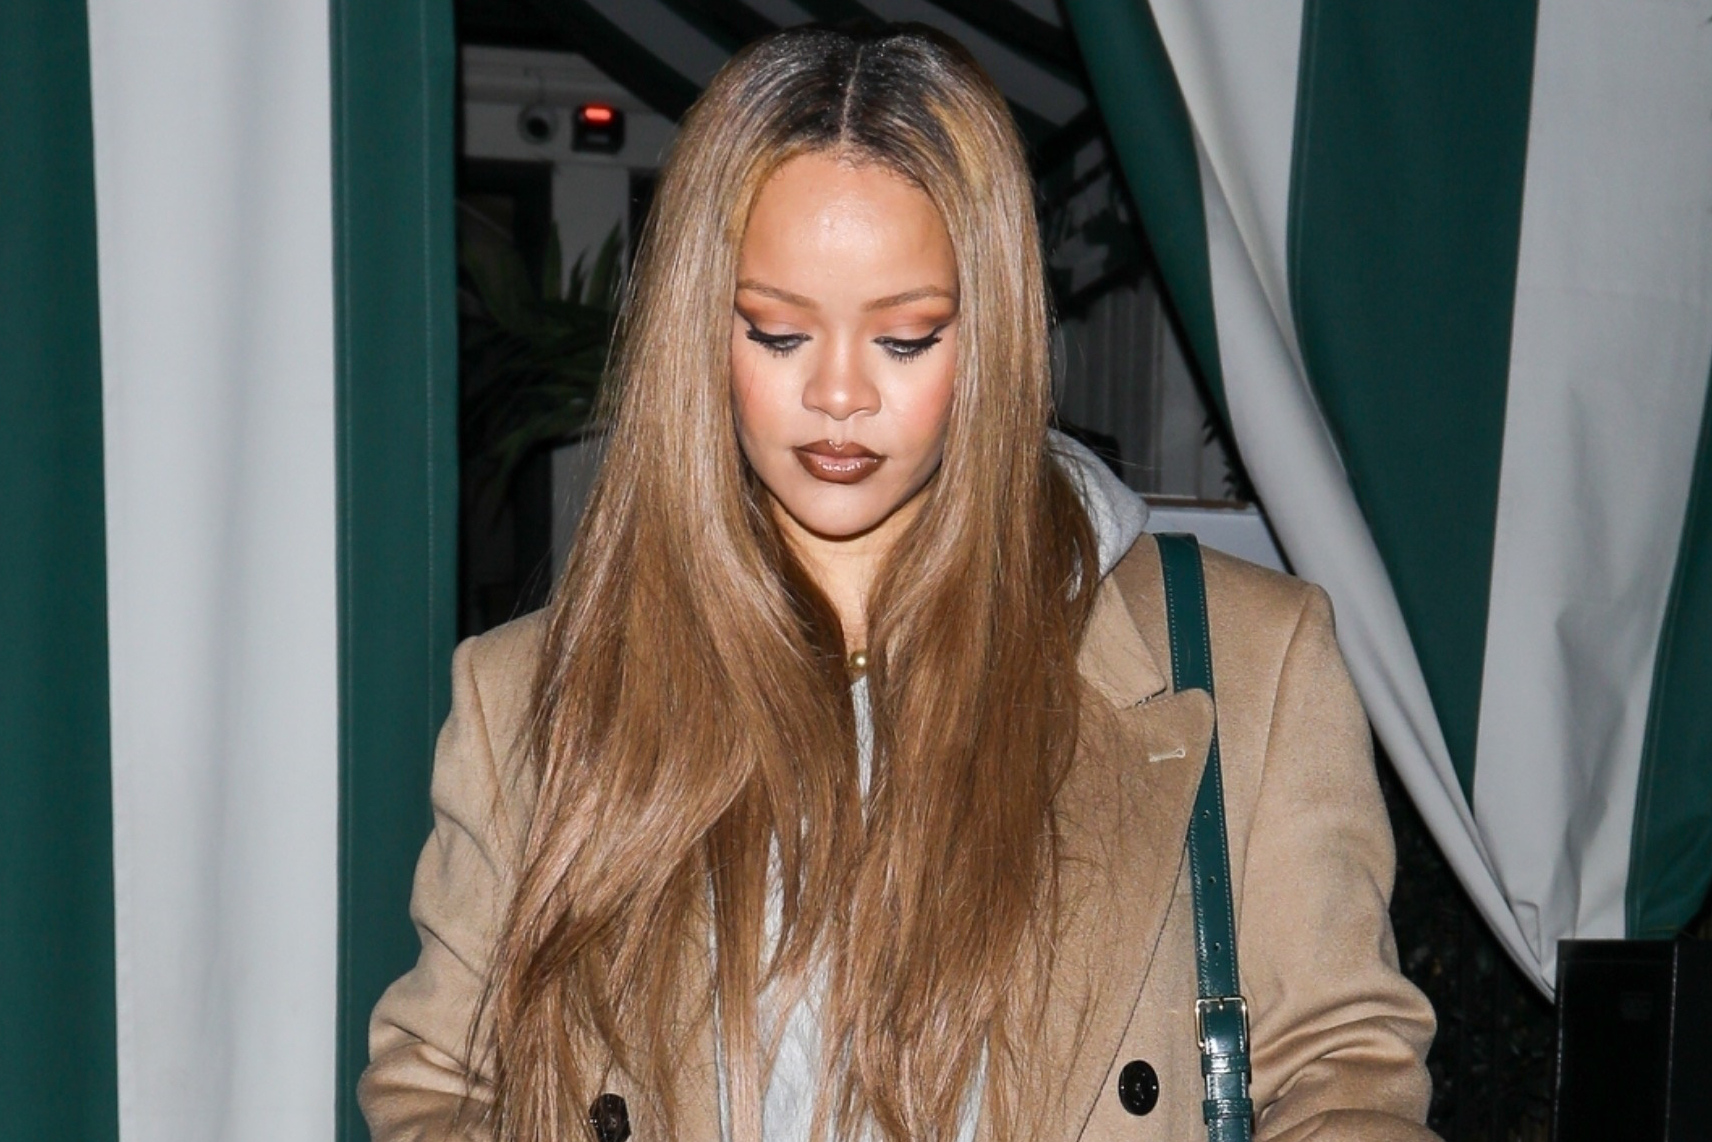 1. Rihanna's Iconic Blonde Hair Looks - wide 5